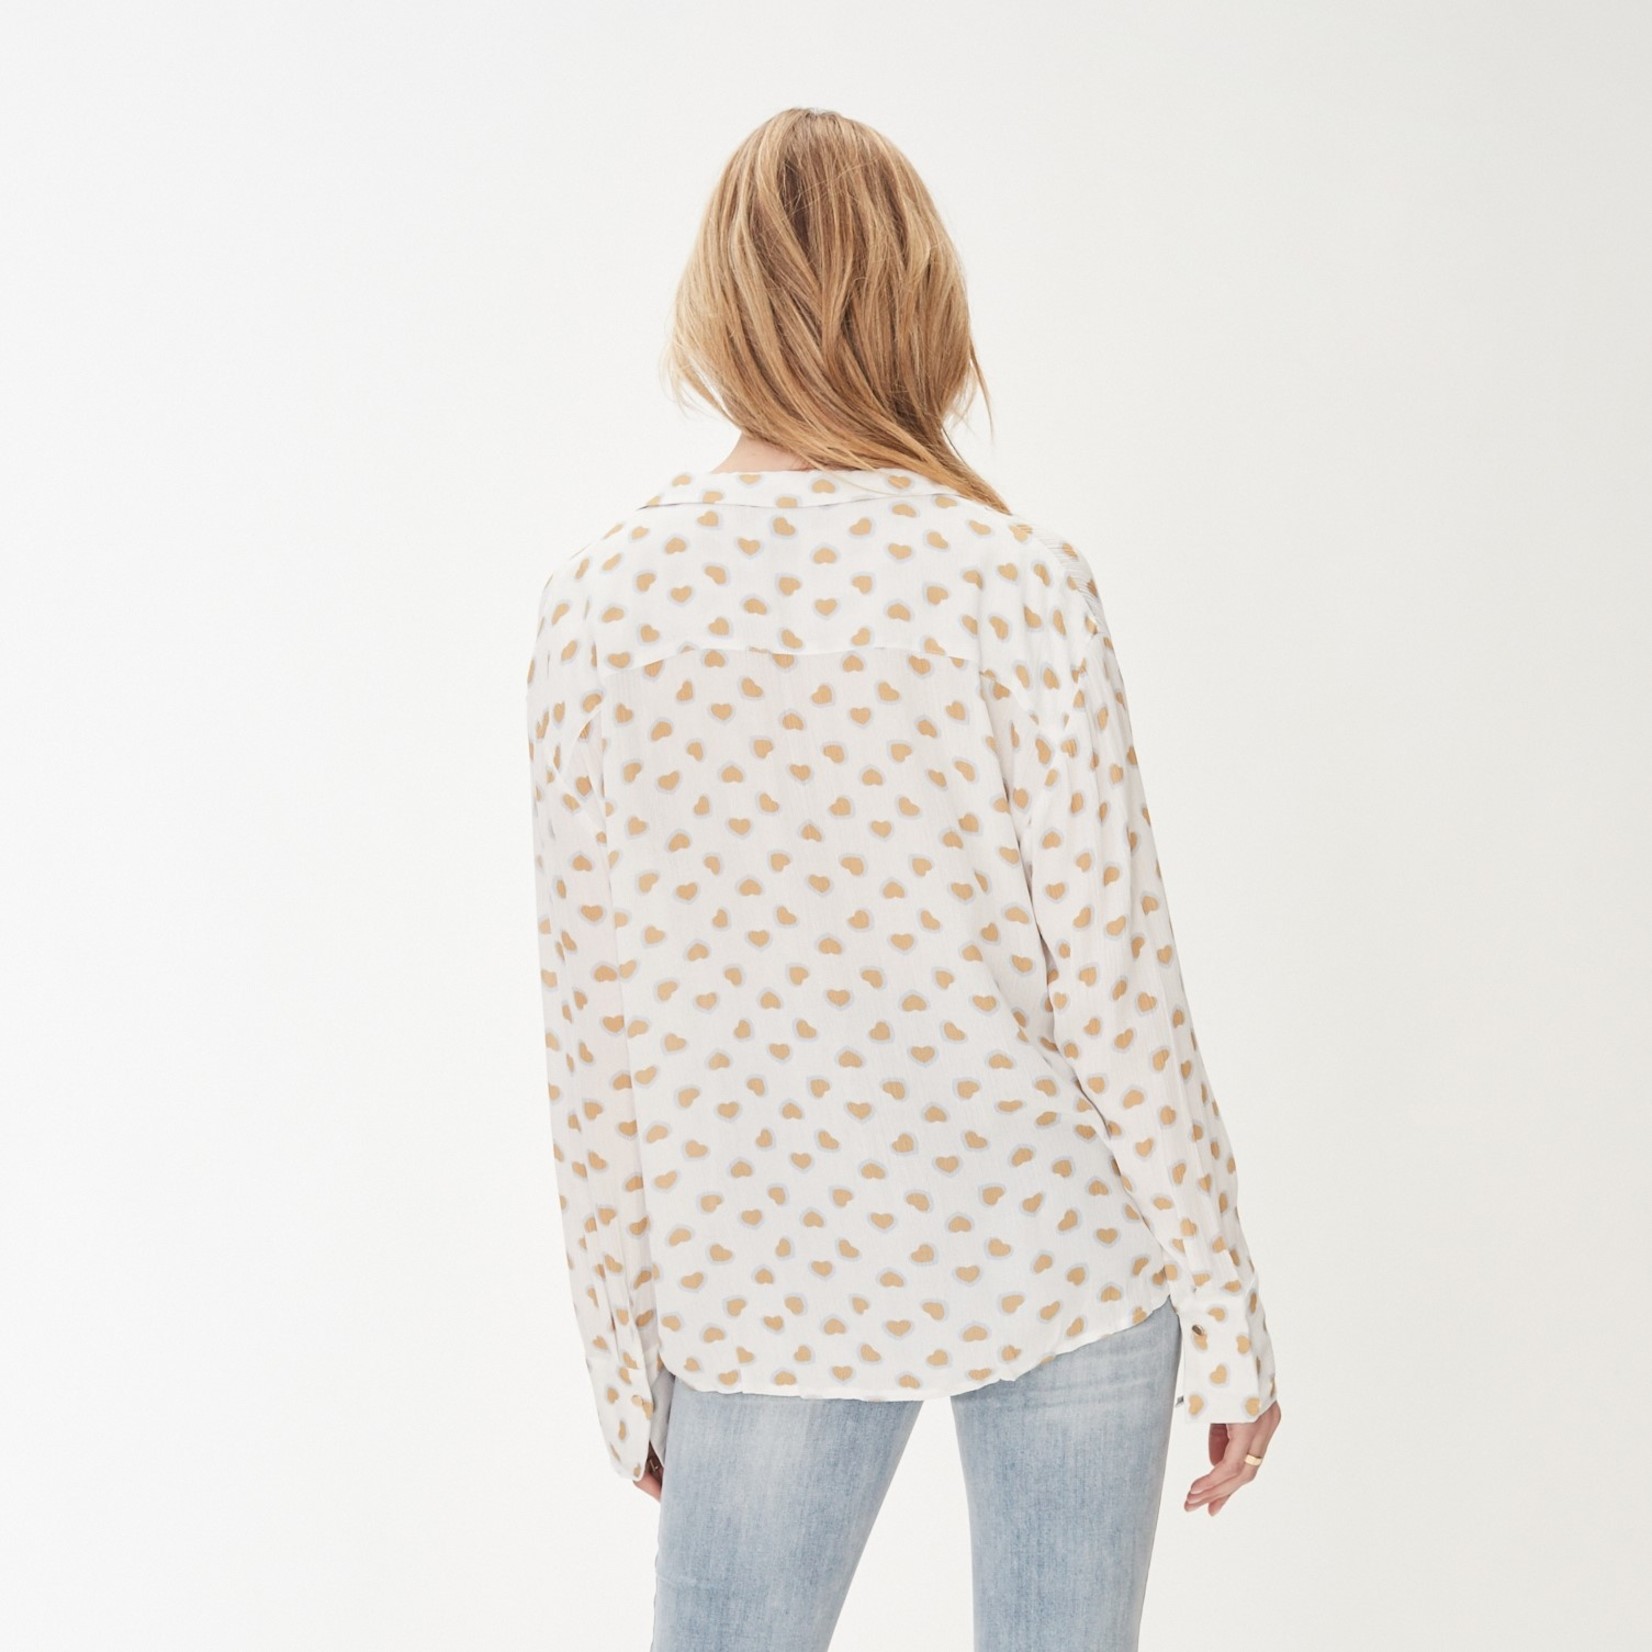 F D J Scattered Heart Printed Shirt